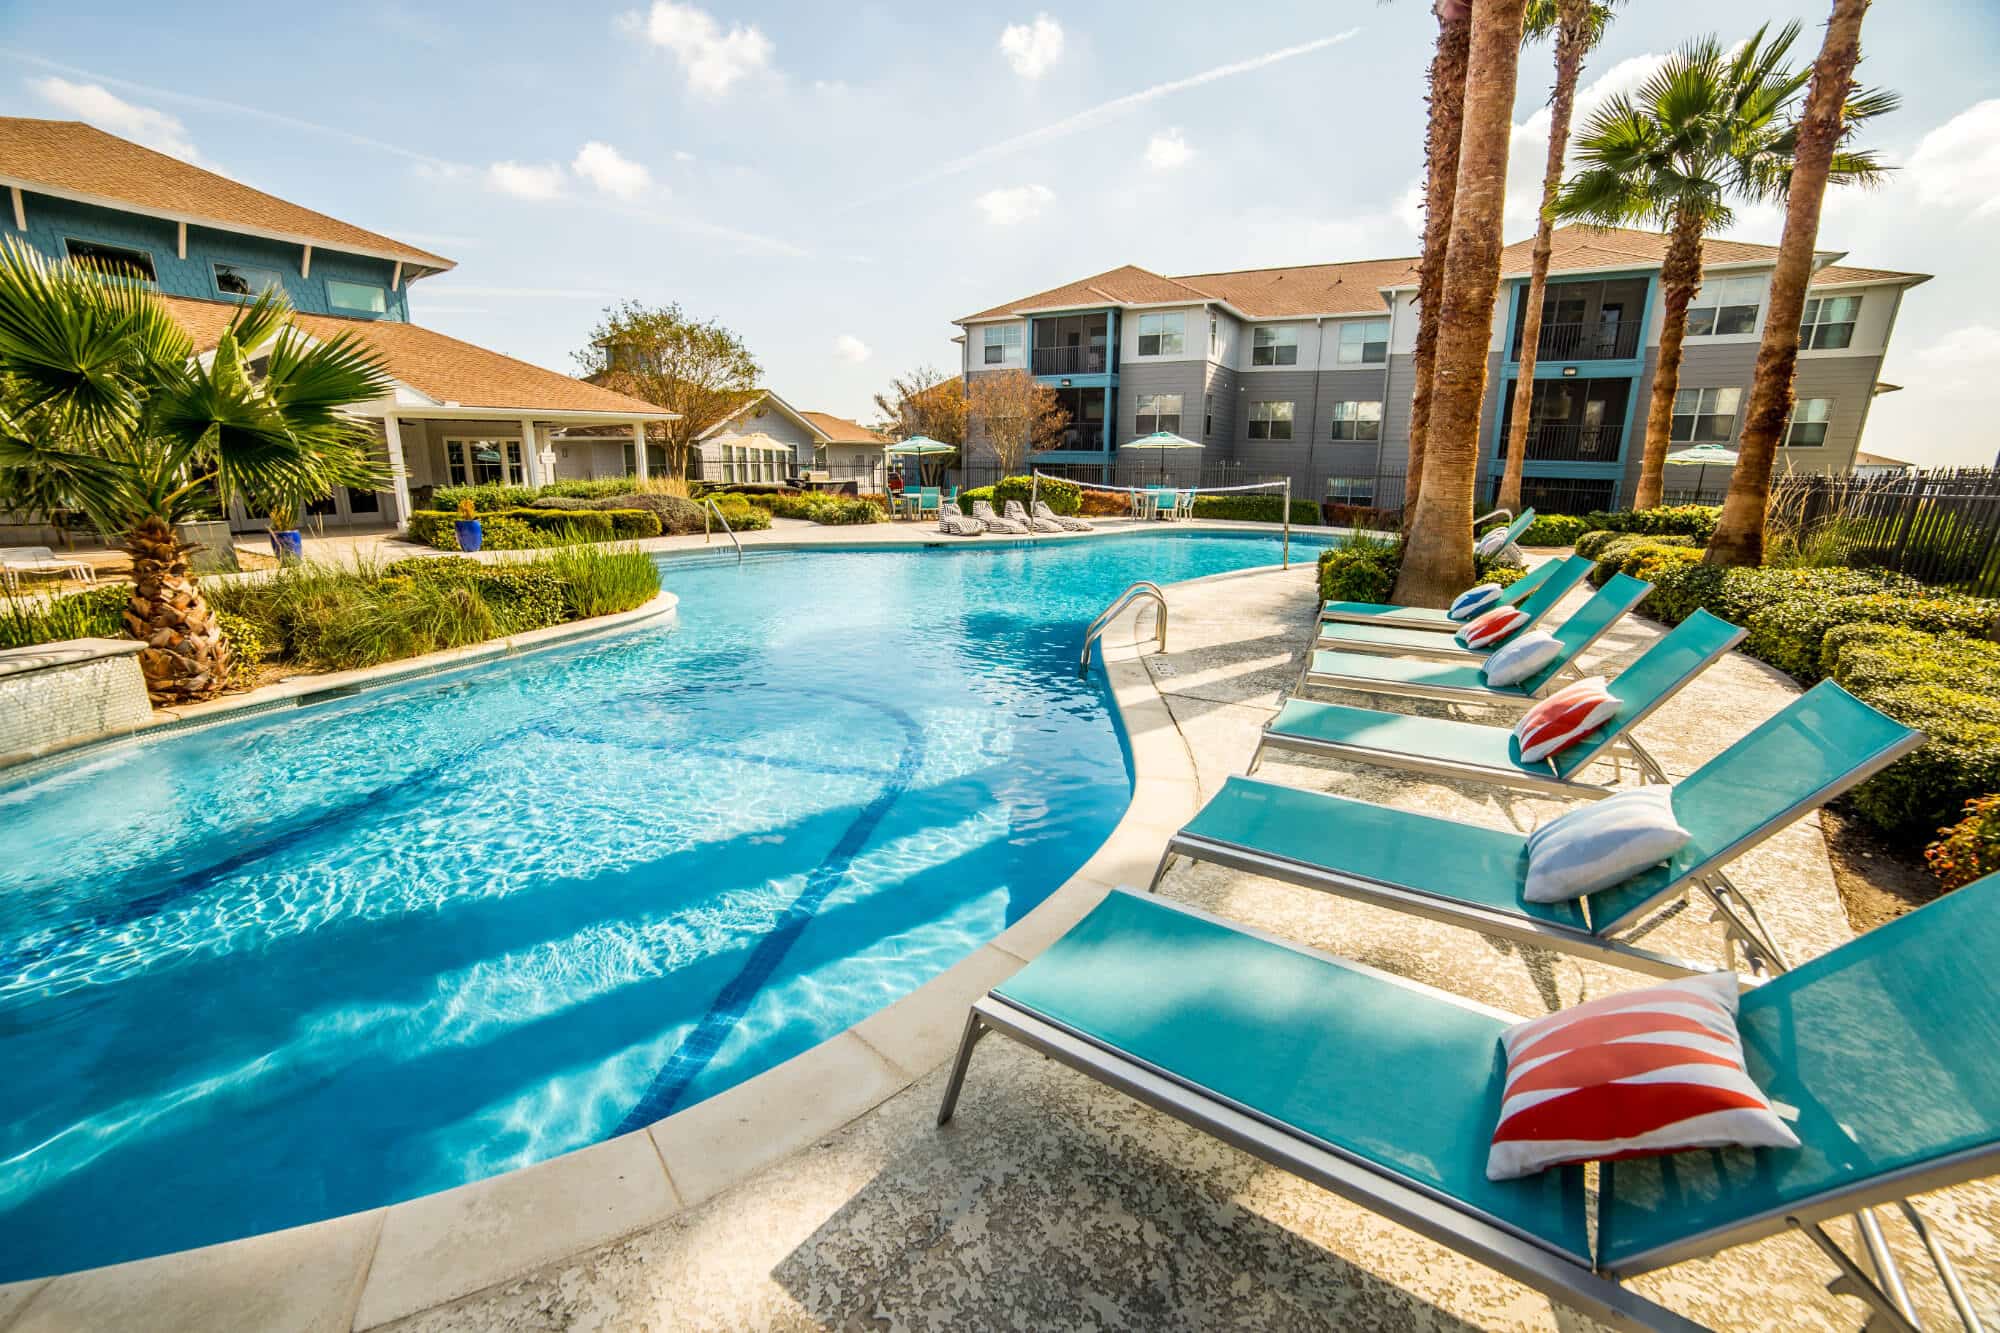 cabana beach san marcos off campus apartments near texas state university resort style pool lounge seating